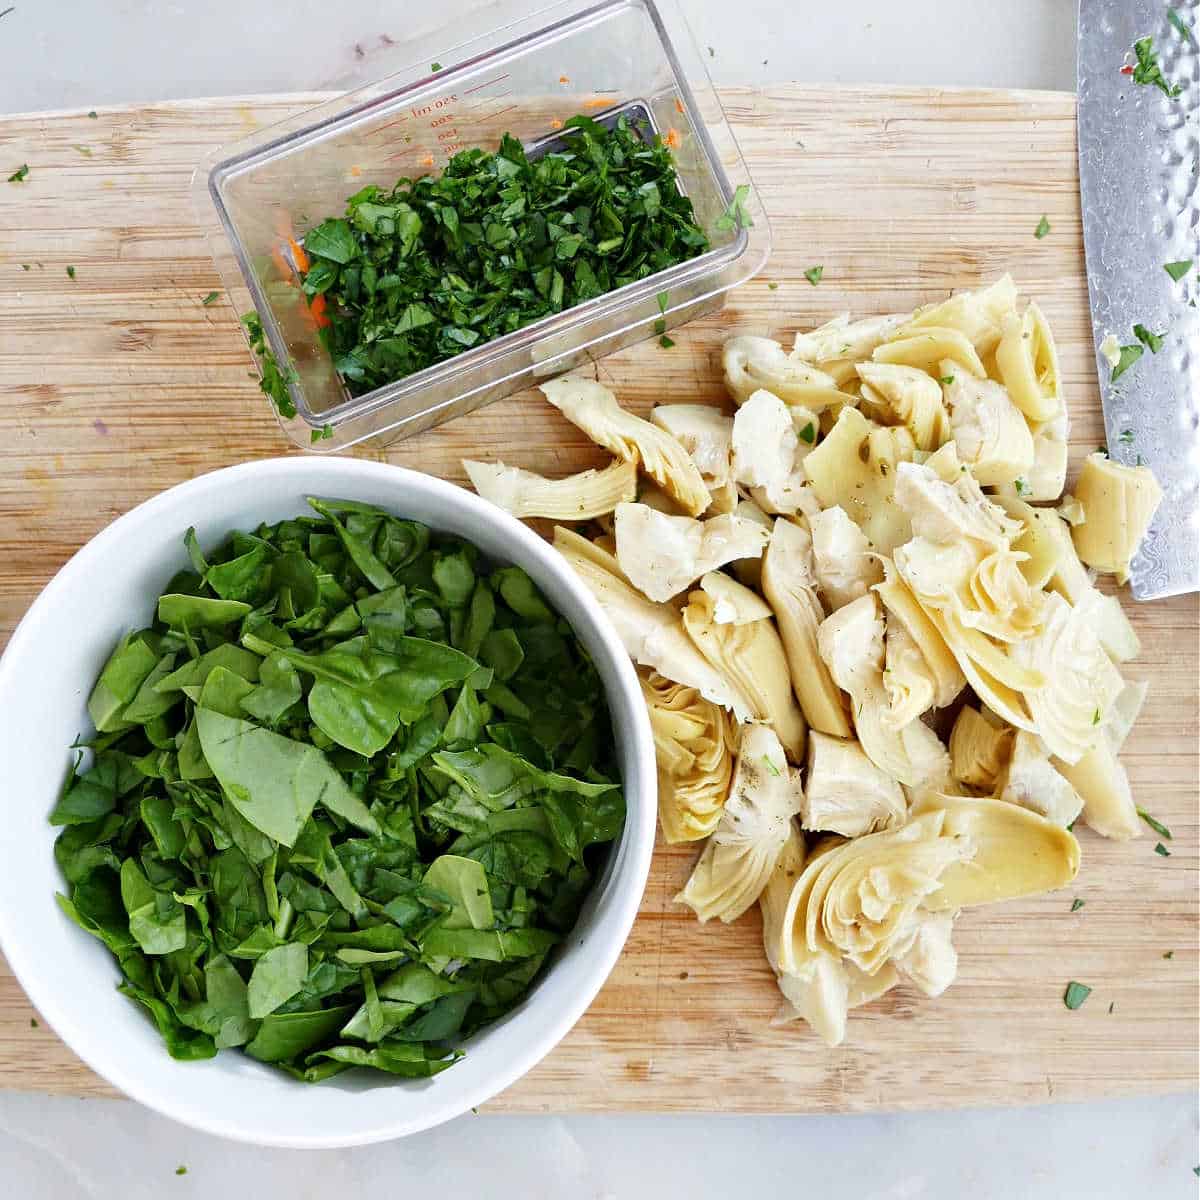 spinach and artichoke hearts being cut up on a cutting board